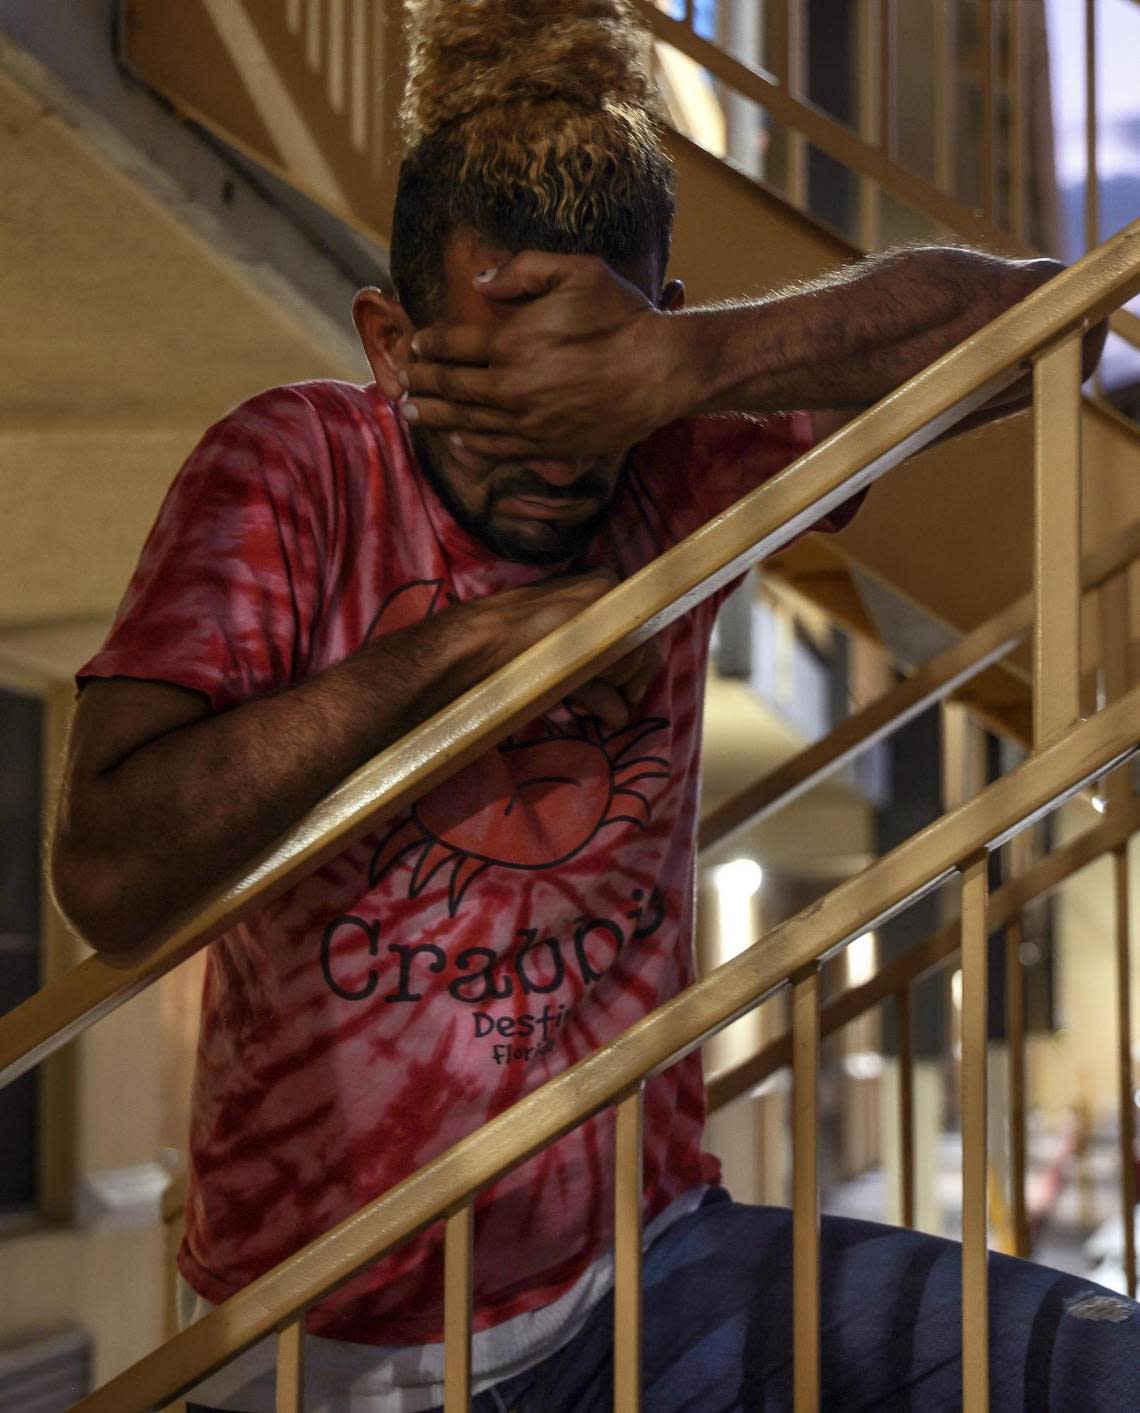 Venezuelan Luis Oswaldo, 39, who was left stranded at La Quinta after he missed the charter bus, contemplates his future. “They left and that was it. They didn’t give out more food. I have water from the lobby. I’m ‘eating’ water now.” About twenty migrants (mostly men) boarded a charter bus back to the Migrant Resources Center after their flight out of San Antonio, Texas was cancelled on Tuesday, September 20, 2022.